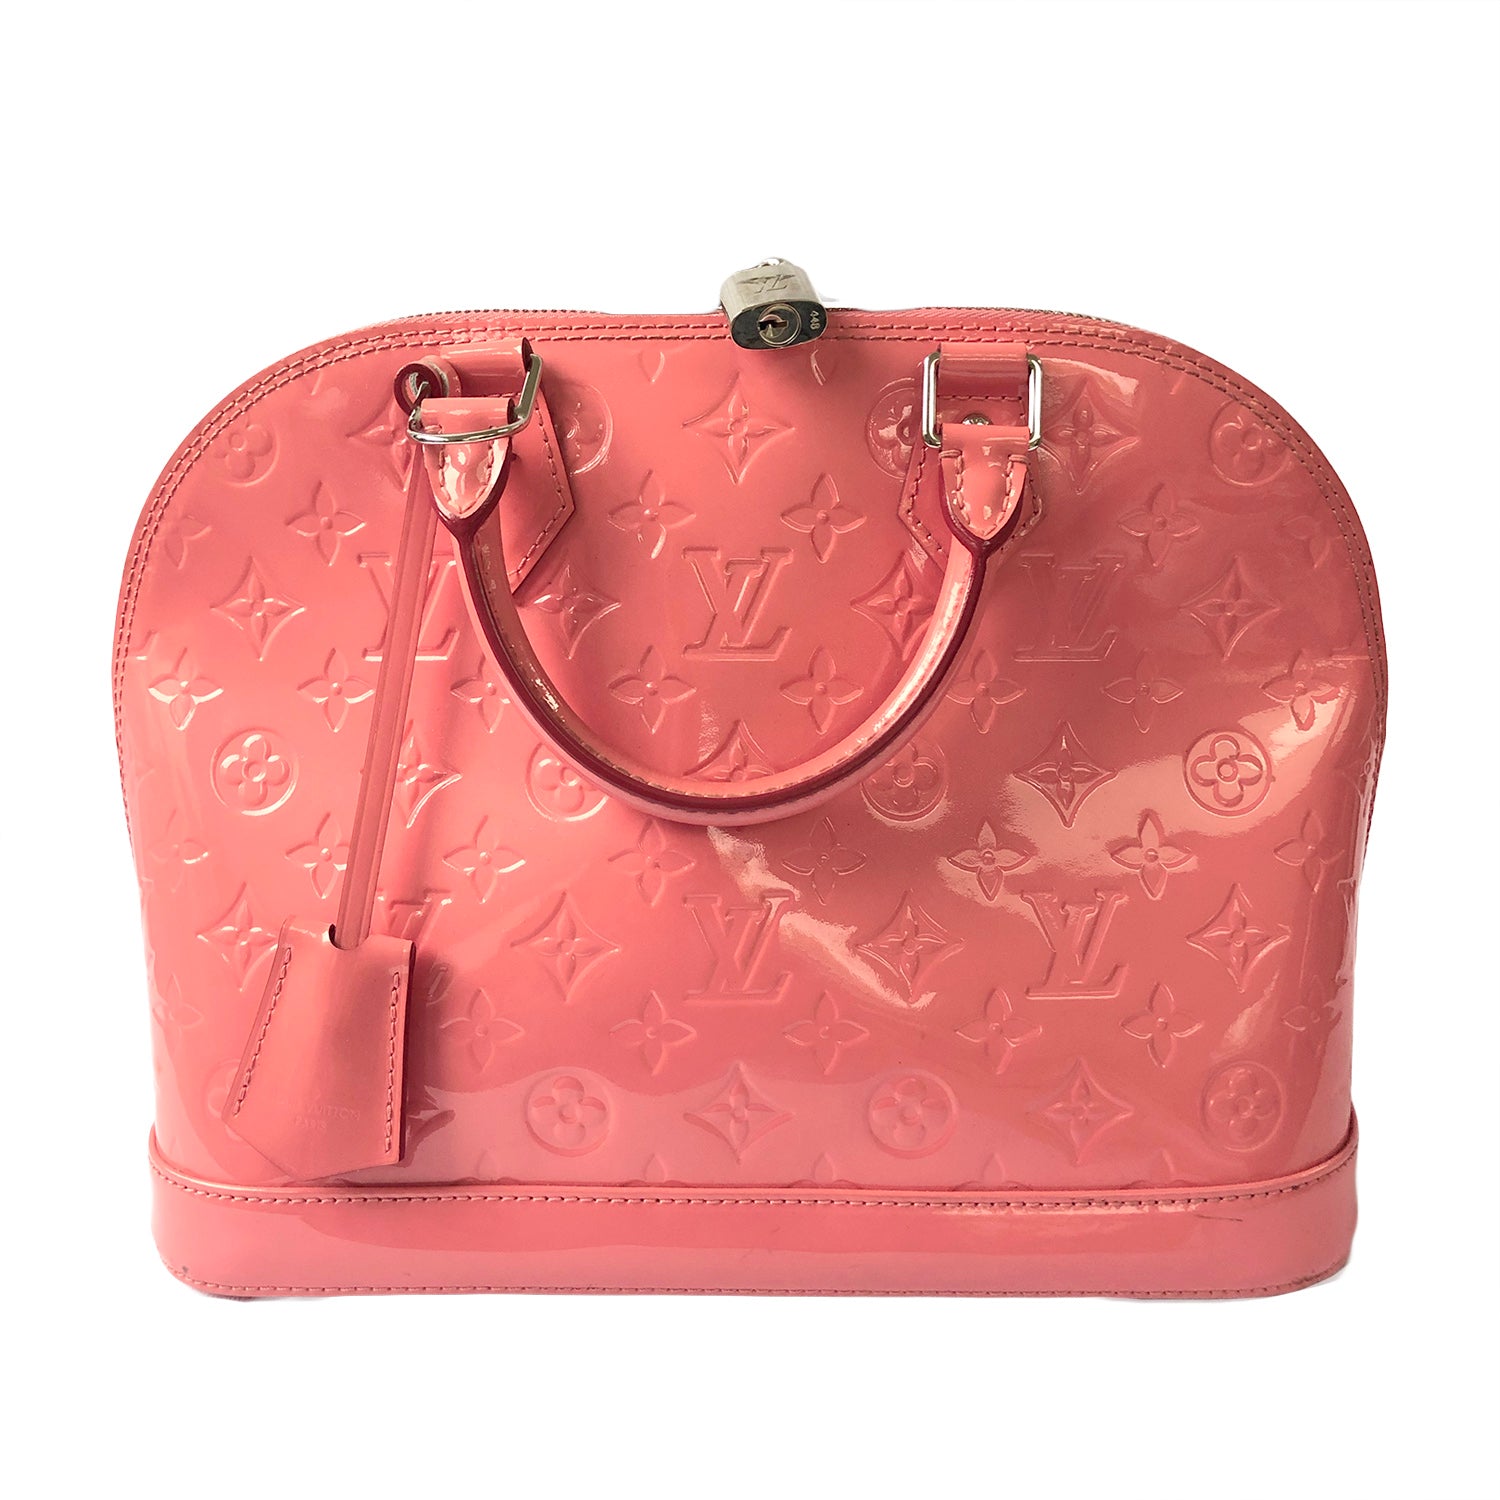 Louis Vuitton Hot Pink Monogram Vernis Leather Alma Pm in Red  Lyst  Australia